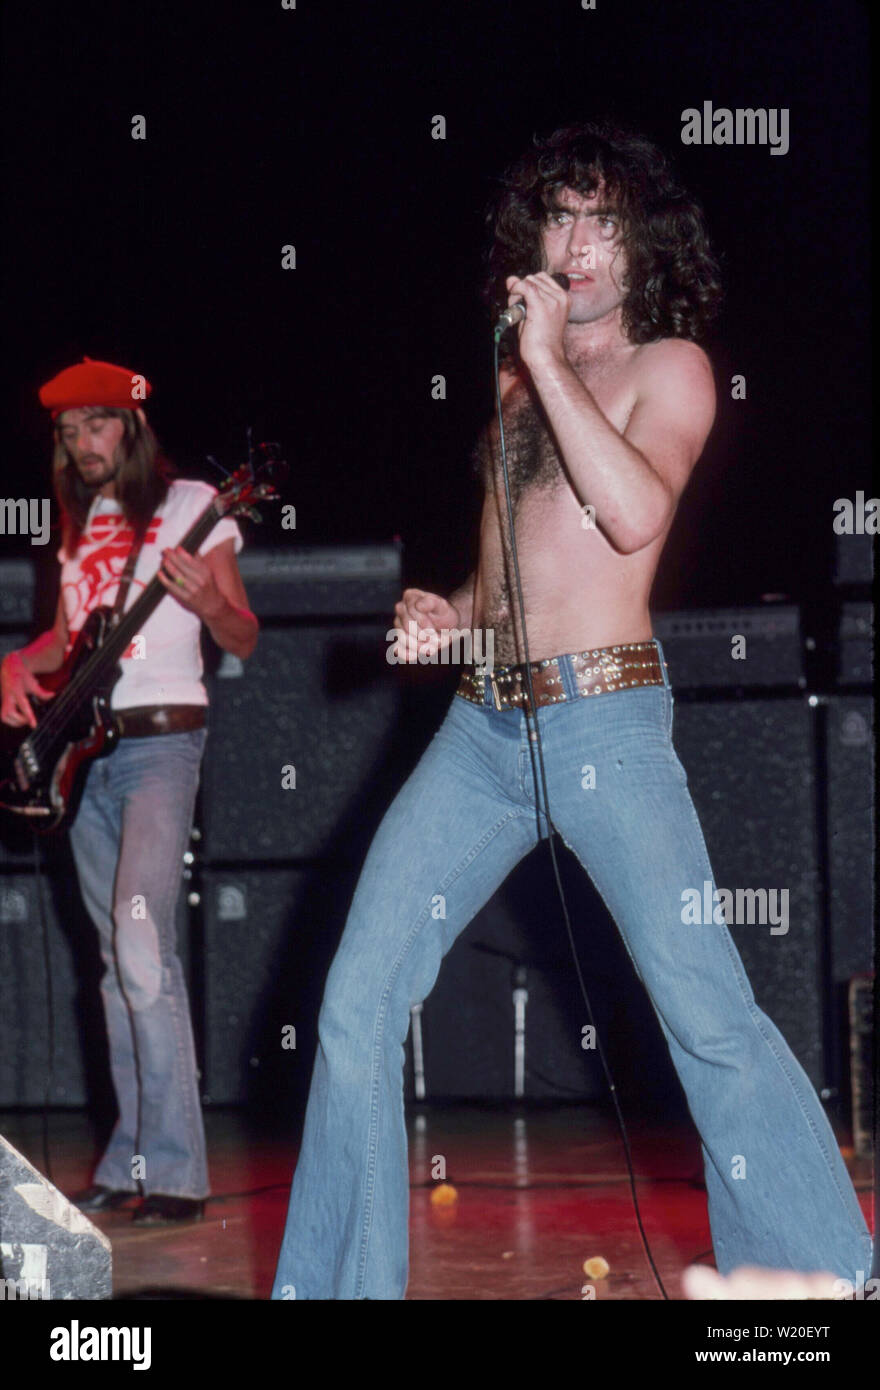 BAD COMPANY US rock group with Paul Rodgers at right about 1975. Photo: Jeffrey Mayer Stock Photo